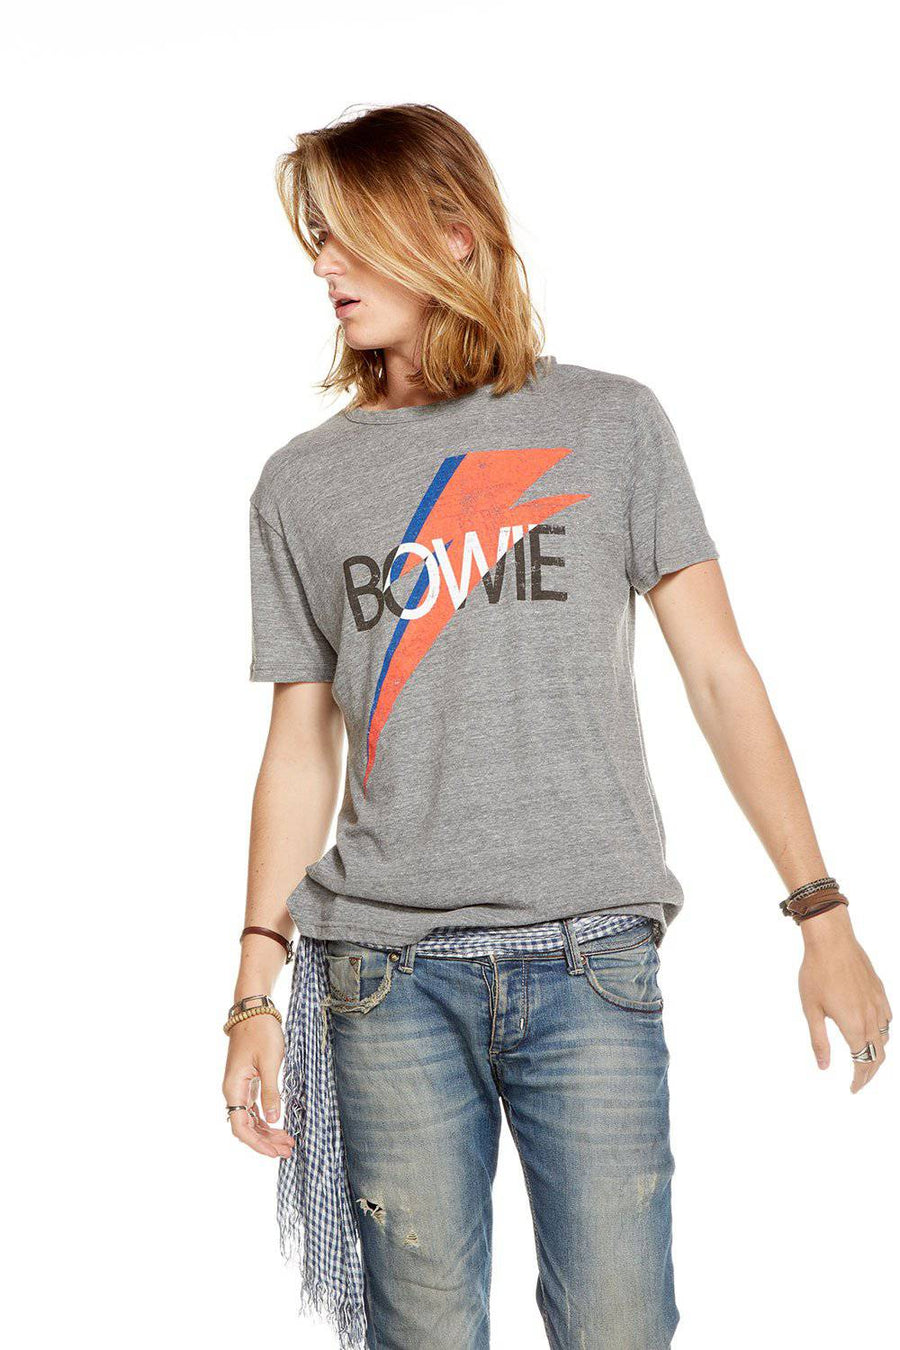 DAVID BOWIE - BOWIE BOLT MENS chaserbrand